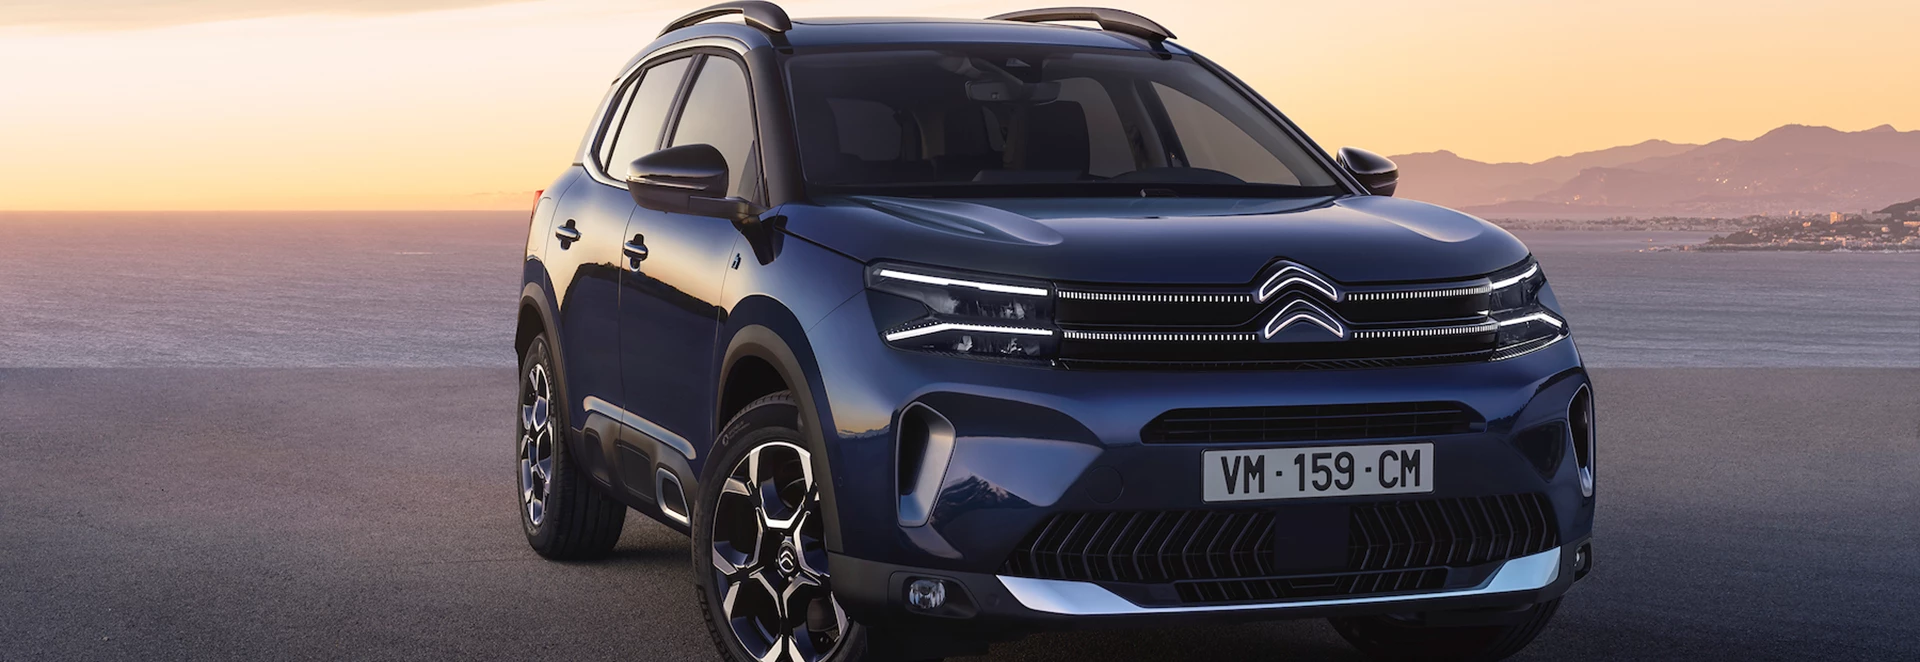 2022 Citroen C5 Aircross revealed with revised styling and new interior technology 